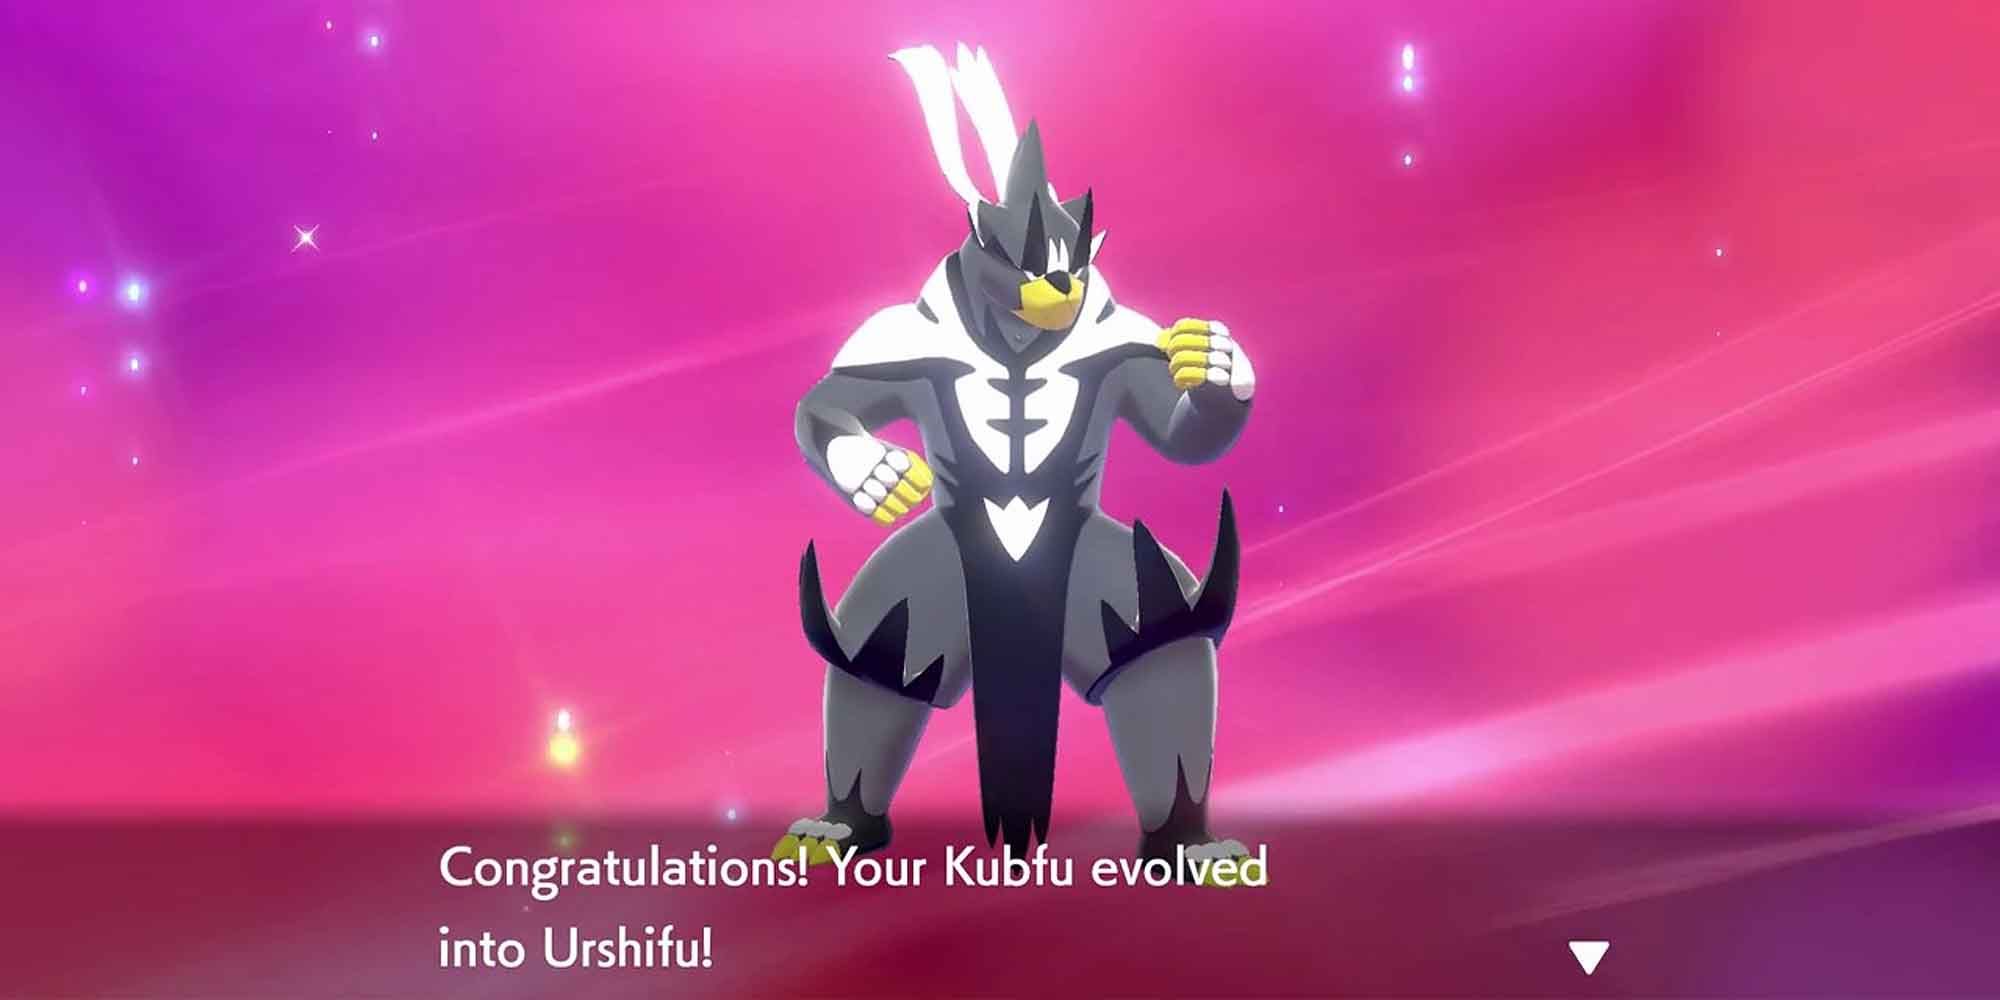 Urshifu is a Fighting/Dark type Pokemon introduced in The Isle Of Armor expansion to Sword and Shield